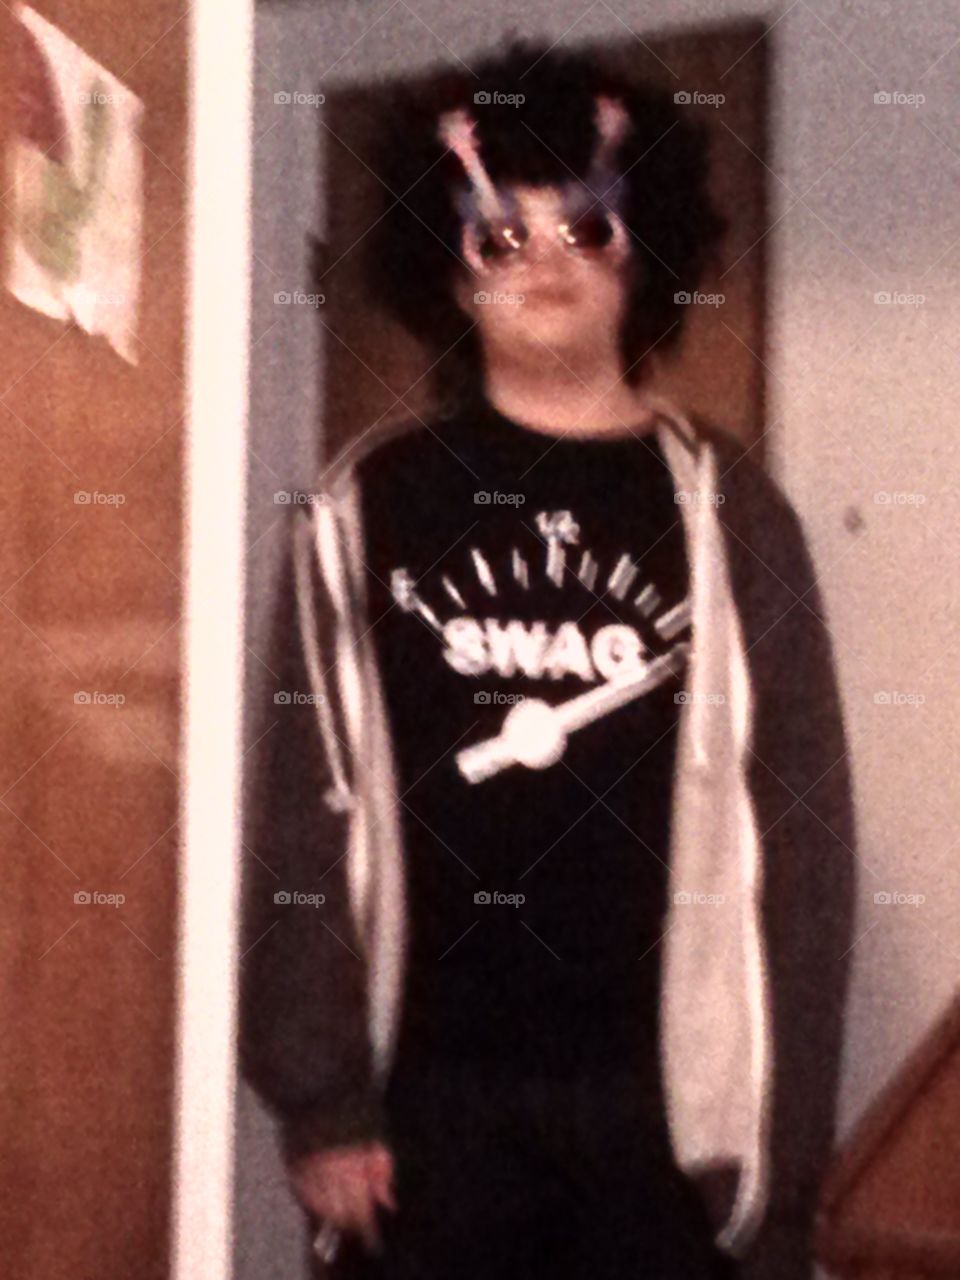 swag. my son is dressed up for spirit week